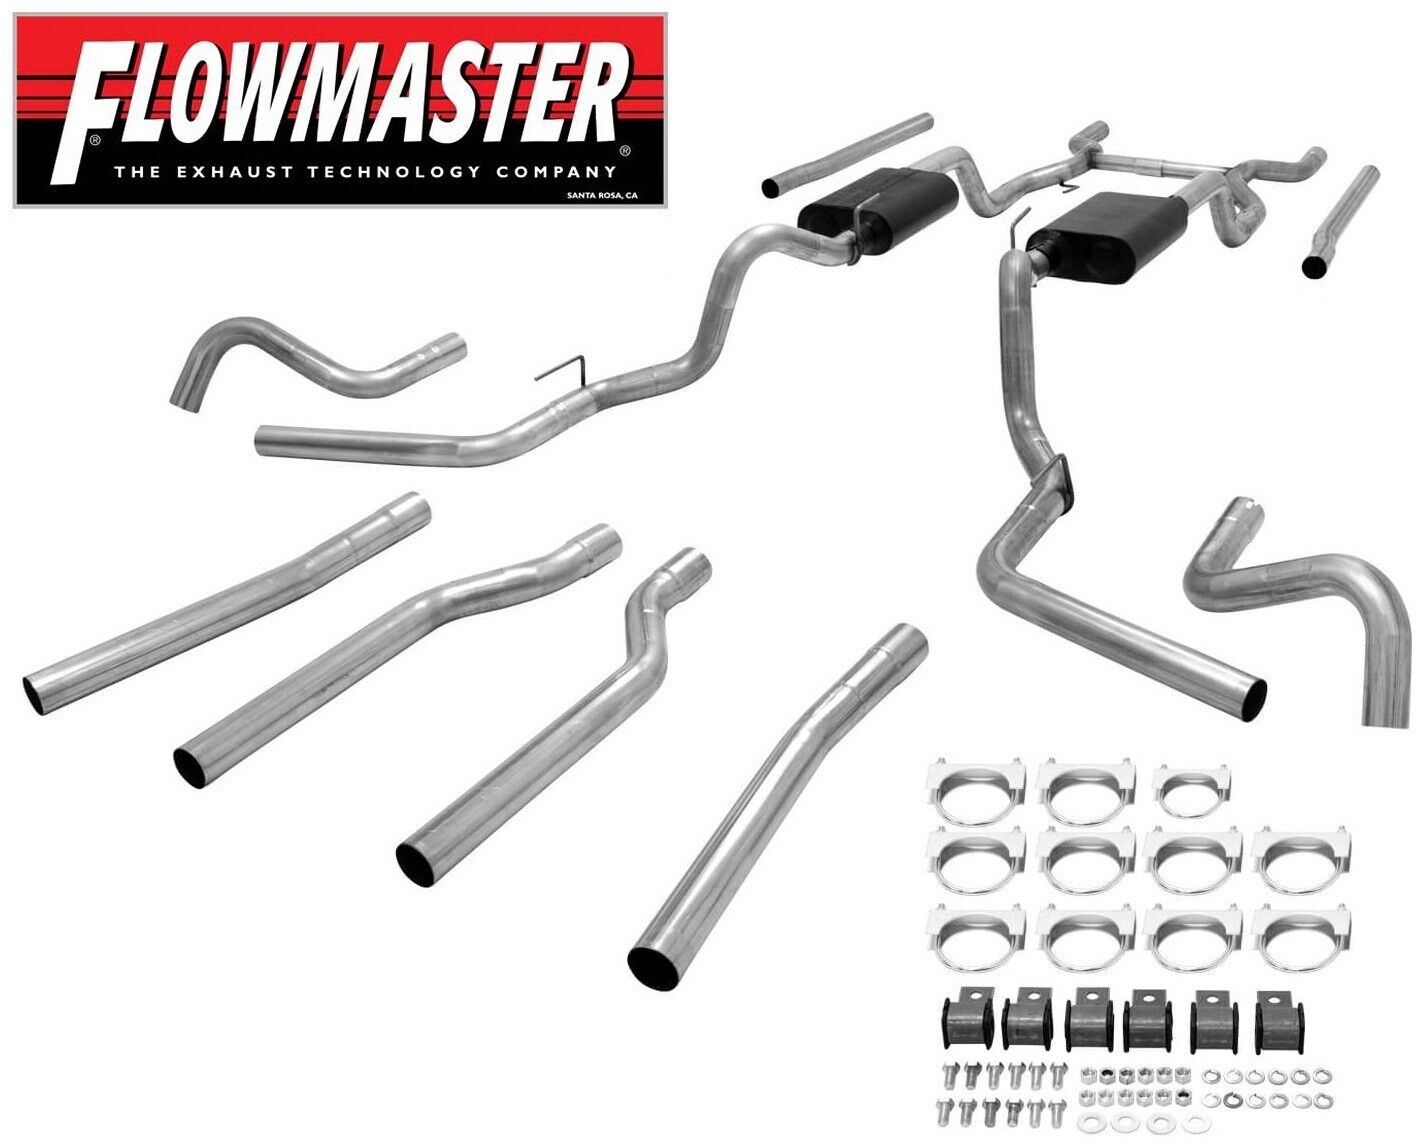 Flowmaster 17654 American Thunder Super 44 Exhaust System 1967-1972 Chevy C10